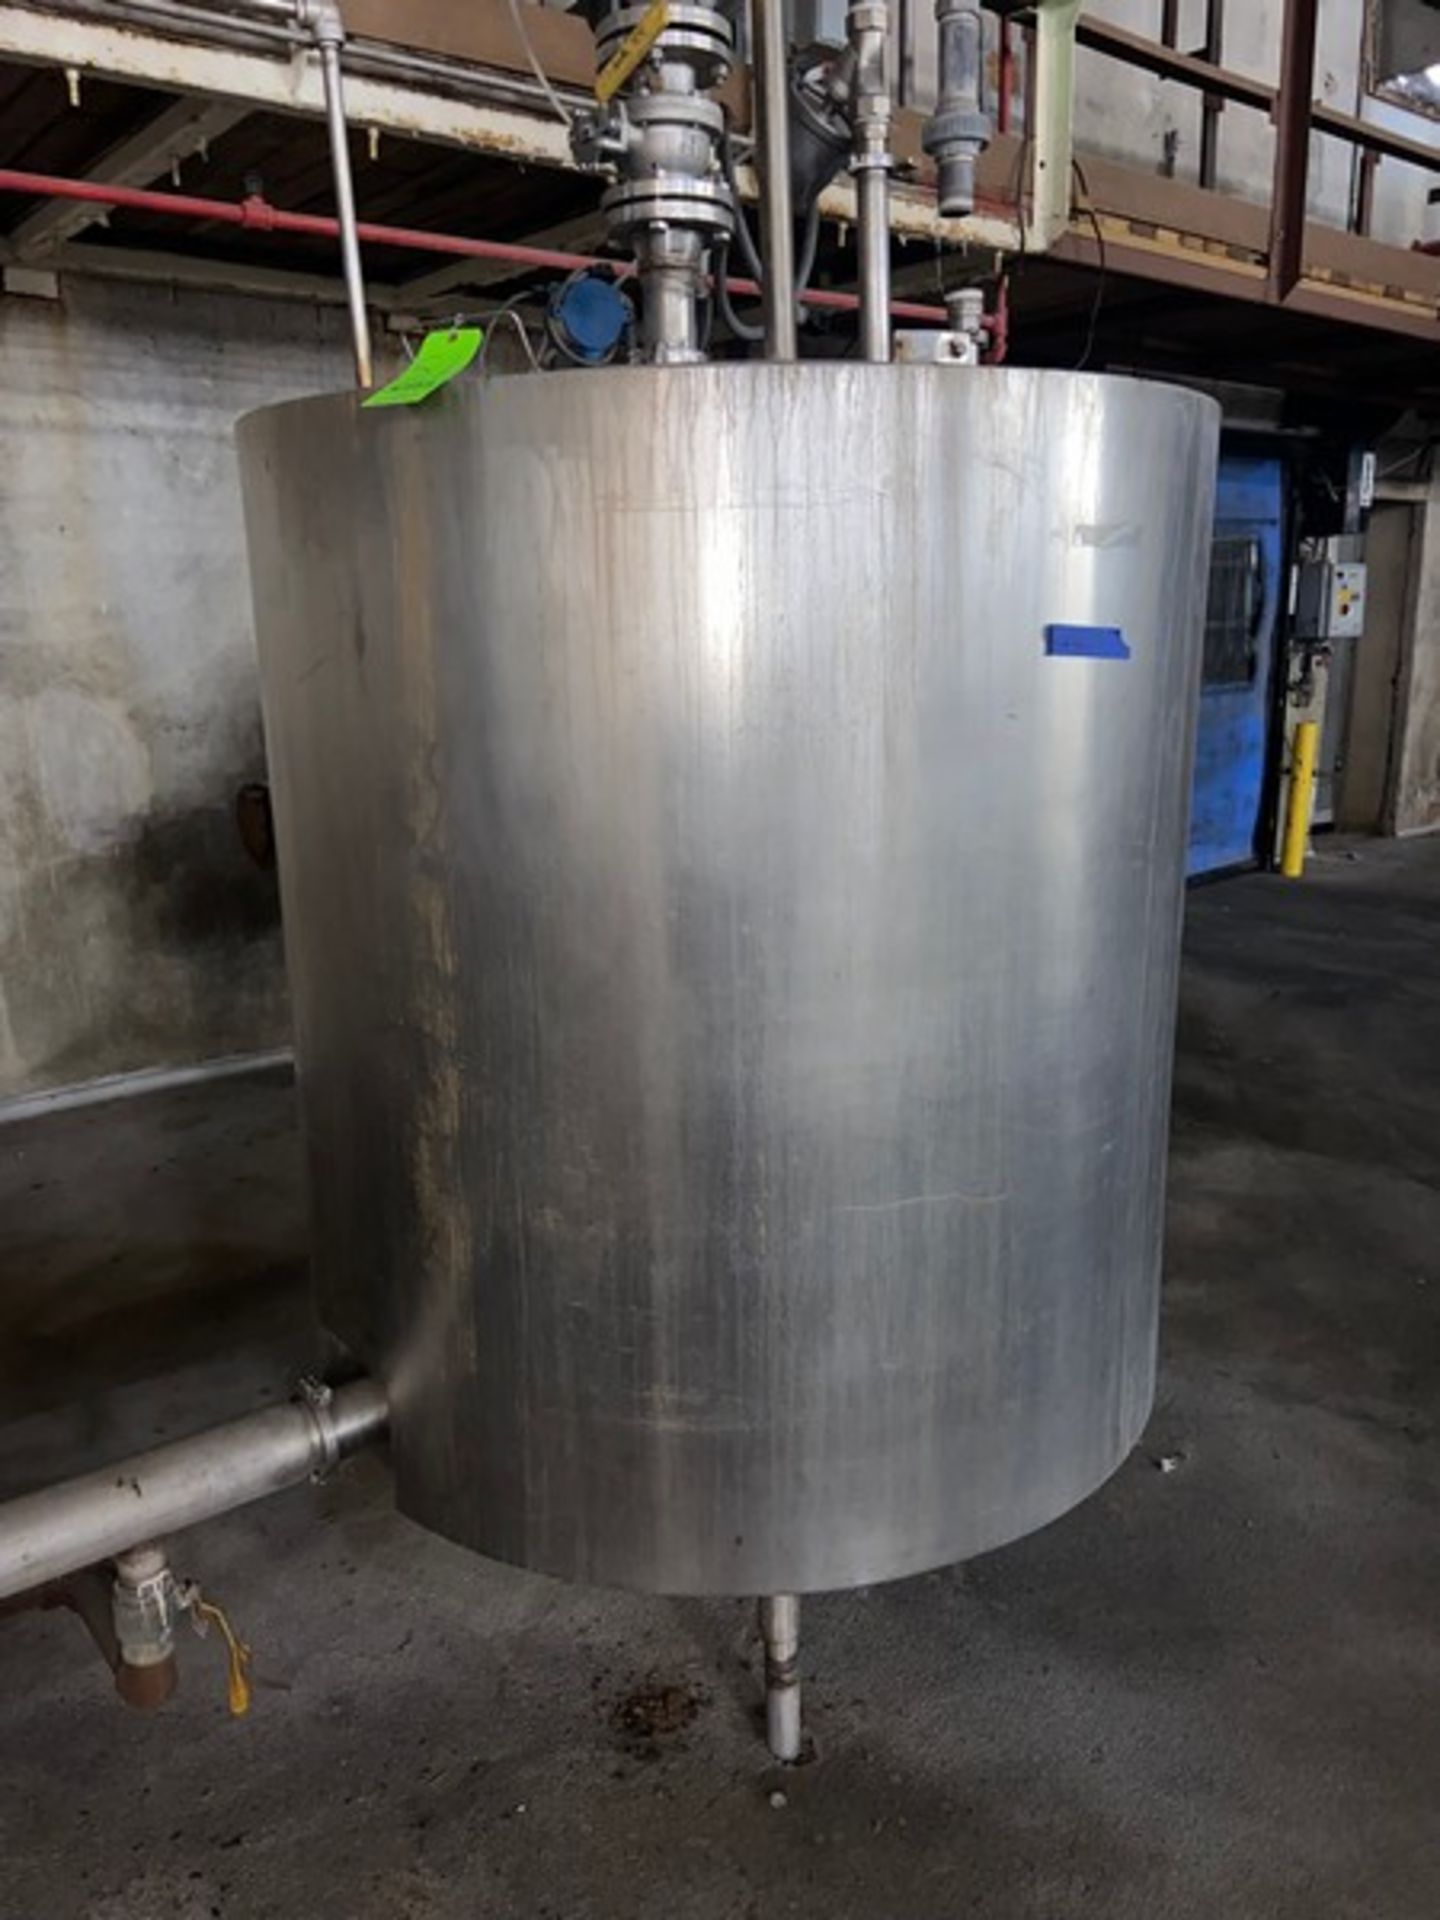 Damrow Bros. 400 Gal. S/S Vertical Insulated Tank, S/N 25609, with S/S Hinge Lid, Mounted on S/S - Image 9 of 16